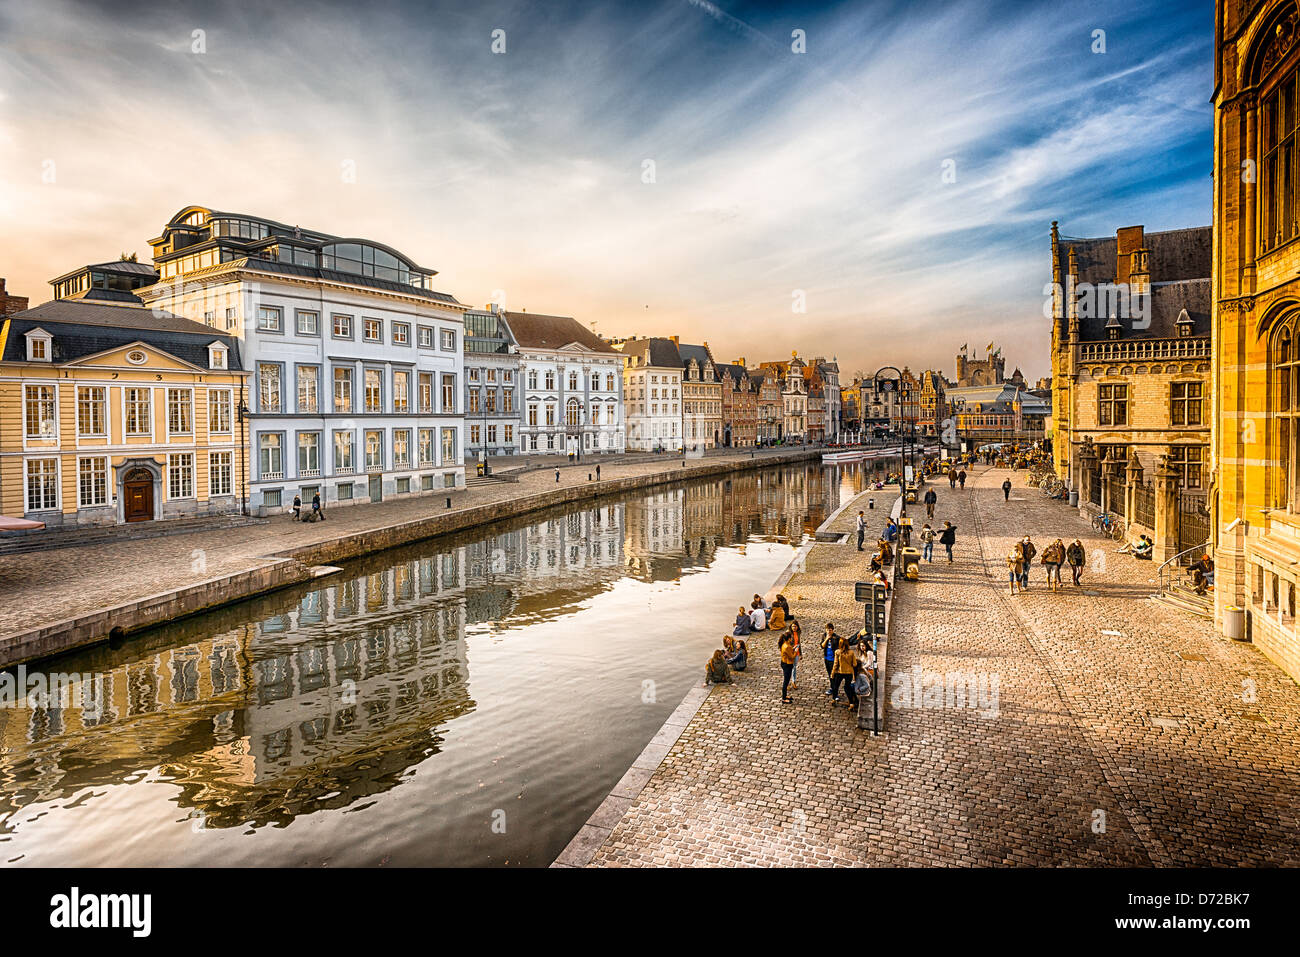 HDR image of canal in Gent, Belgium Stock Photo